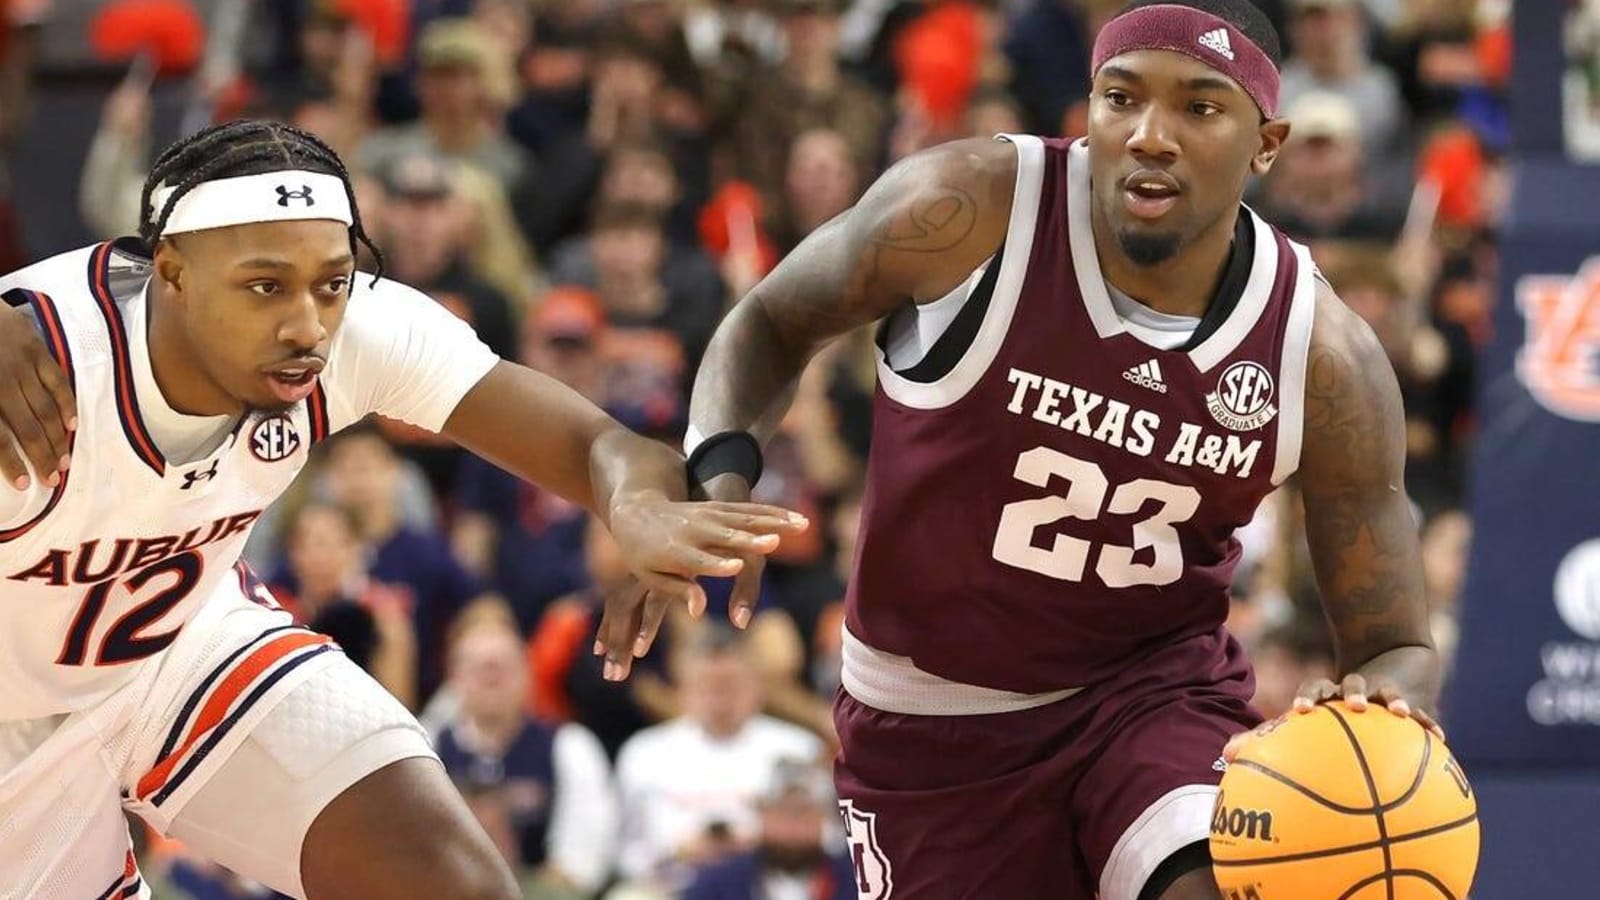 Texas A&M sees Arkansas as another &#39;big game&#39; after upset win